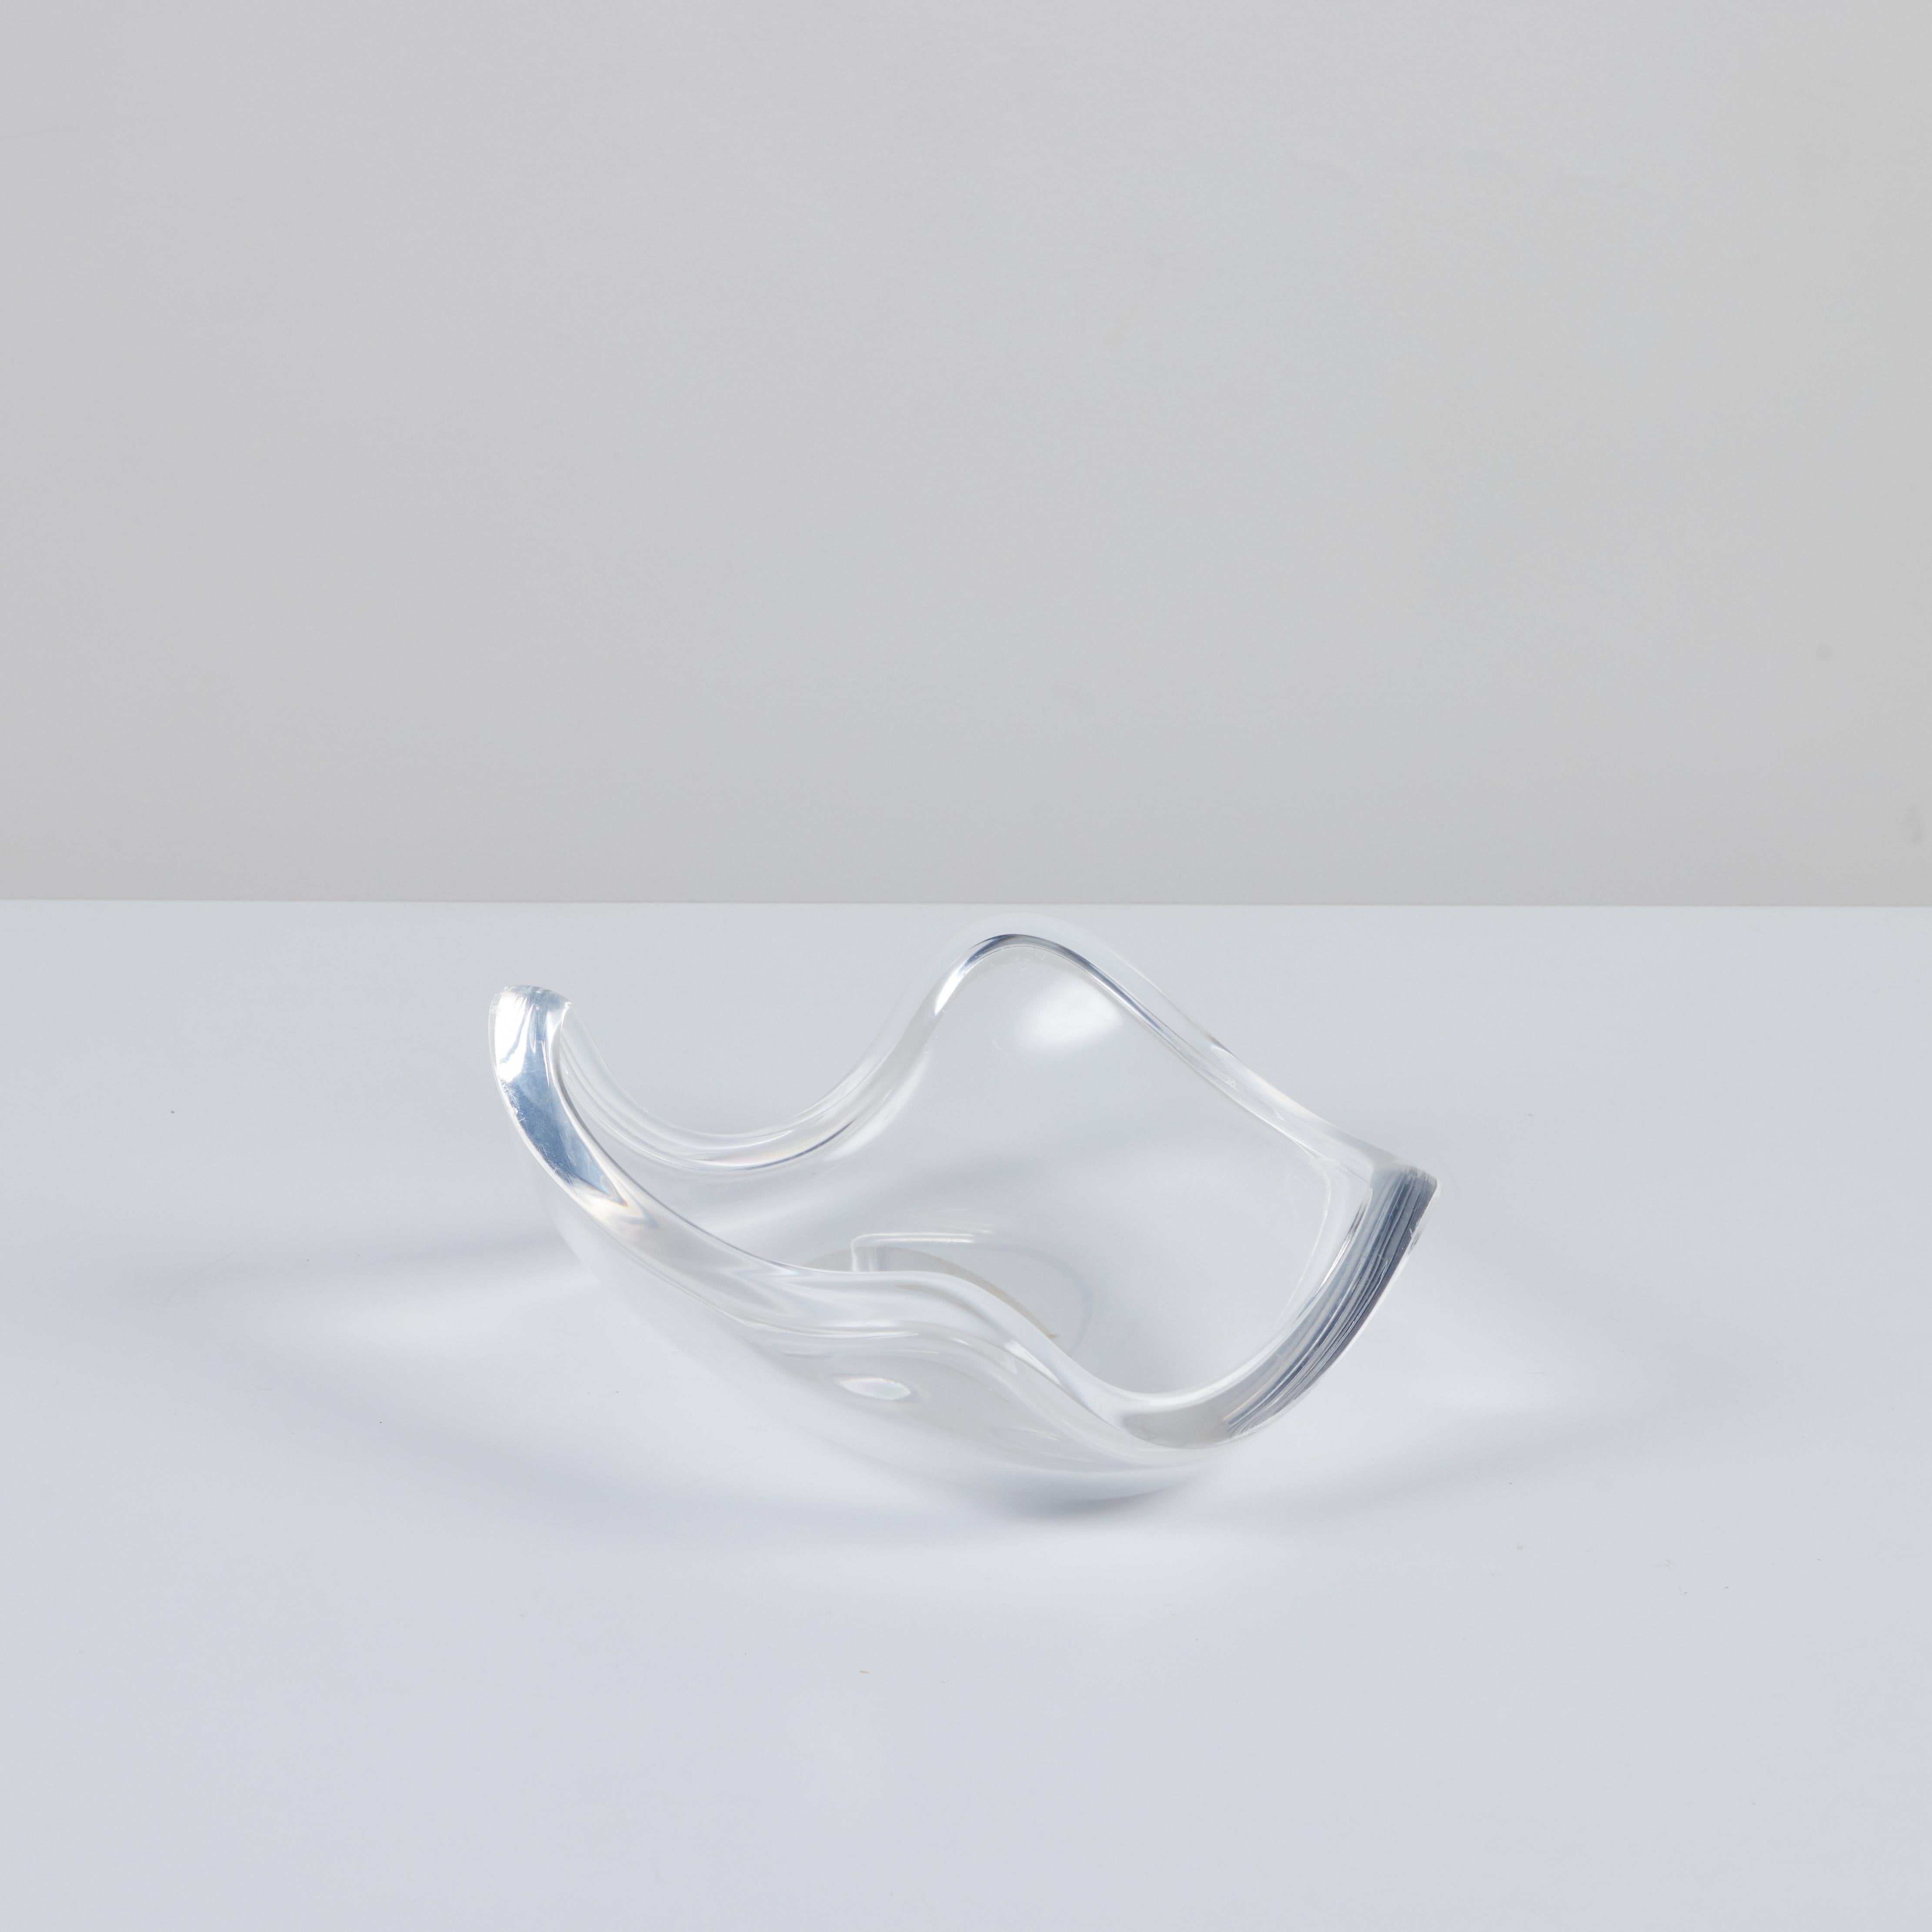 Lucite bowl by Ritts Co., c.1970s, USA. The bowl features curled sides with soft rounded curves. This piece can serve as a vide poche, catchall, or fruit bowl.

Dimensions
12